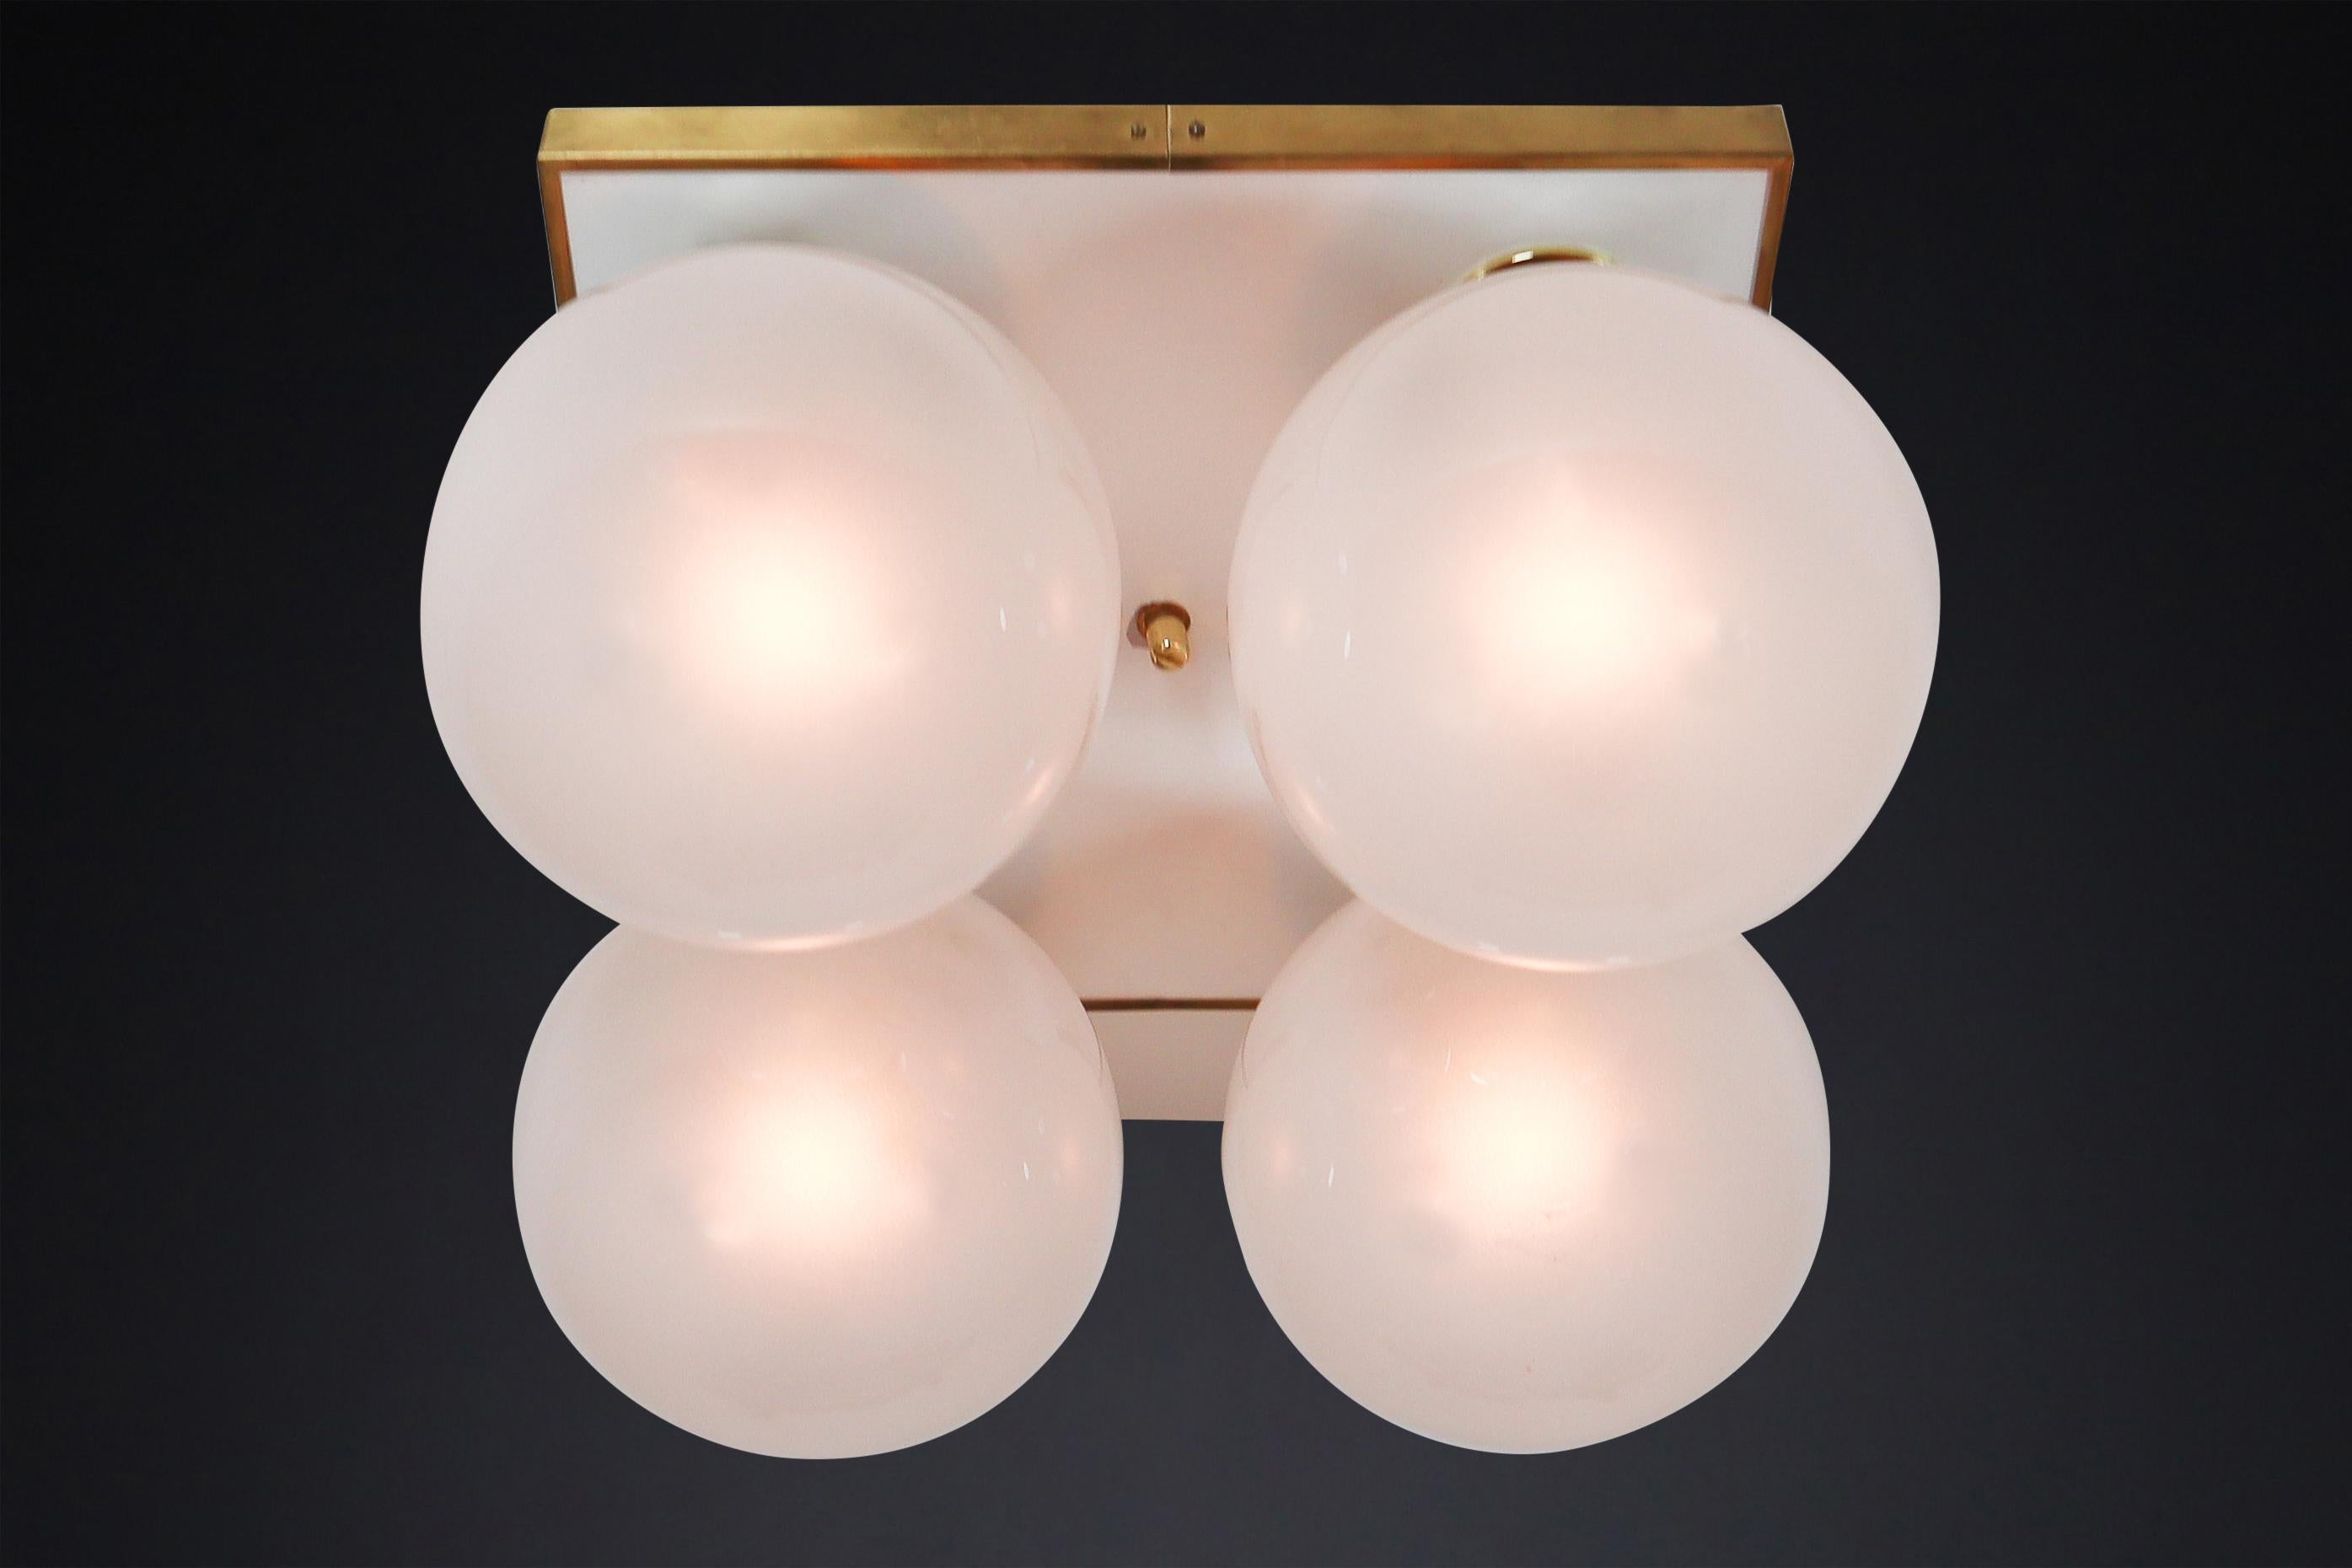 Mid-Century Modern Brass Ceiling Chandeliers with Four Pearl White Glass Globes.

This set of large midcentury brass ceiling lights or flush mounts was designed by Preciosa and produced in the Czech Republic during the early 1970s. With their brass